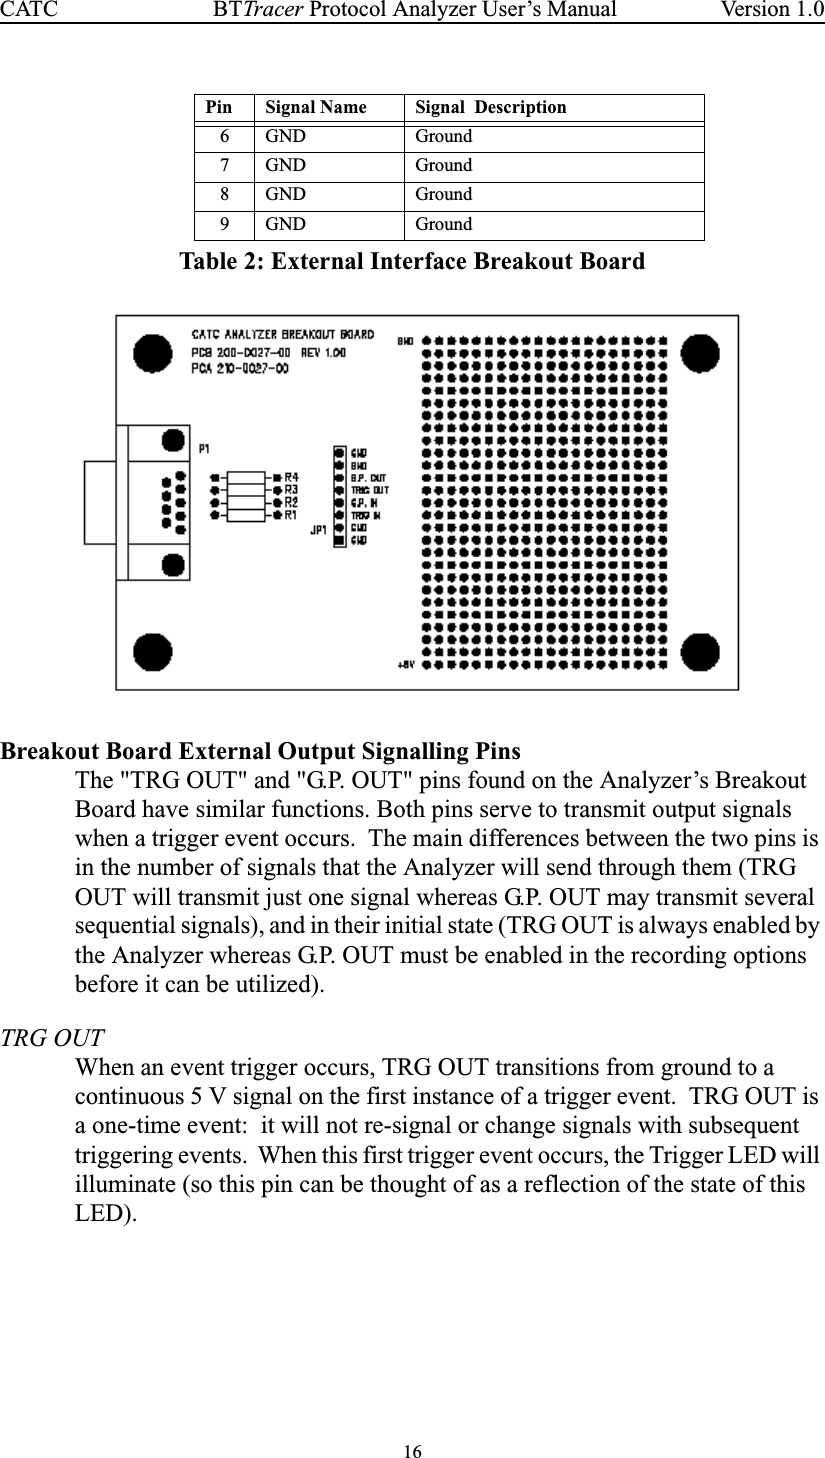 16BTTracer Protocol Analyzer User’s ManualCATC Version 1.0Table 2: External Interface Breakout BoardBreakout Board External Output Signalling PinsThe &quot;TRG OUT&quot; and &quot;G.P. OUT&quot; pins found on the Analyzer’s BreakoutBoard have similar functions. Both pins serve to transmit output signalswhen a trigger event occurs. The main differences between the two pins isin the number of signals that the Analyzer will send through them (TRGOUT will transmit just one signal whereas G.P. OUT may transmit severalsequential signals), and in their initial state (TRG OUT is always enabled bythe Analyzer whereas G.P. OUT must be enabled in the recording optionsbefore it can be utilized).TRG OUTWhen an event trigger occurs, TRG OUT transitions from ground to acontinuous 5 V signal on the first instance of a trigger event. TRG OUT isa one-time event: it will not re-signal or change signals with subsequenttriggering events. When this first trigger event occurs, the Trigger LED willilluminate (so this pin can be thought of as a reflection of the state of thisLED).6 GND Ground7 GND Ground8 GND Ground9 GND GroundPin Signal Name Signal Description